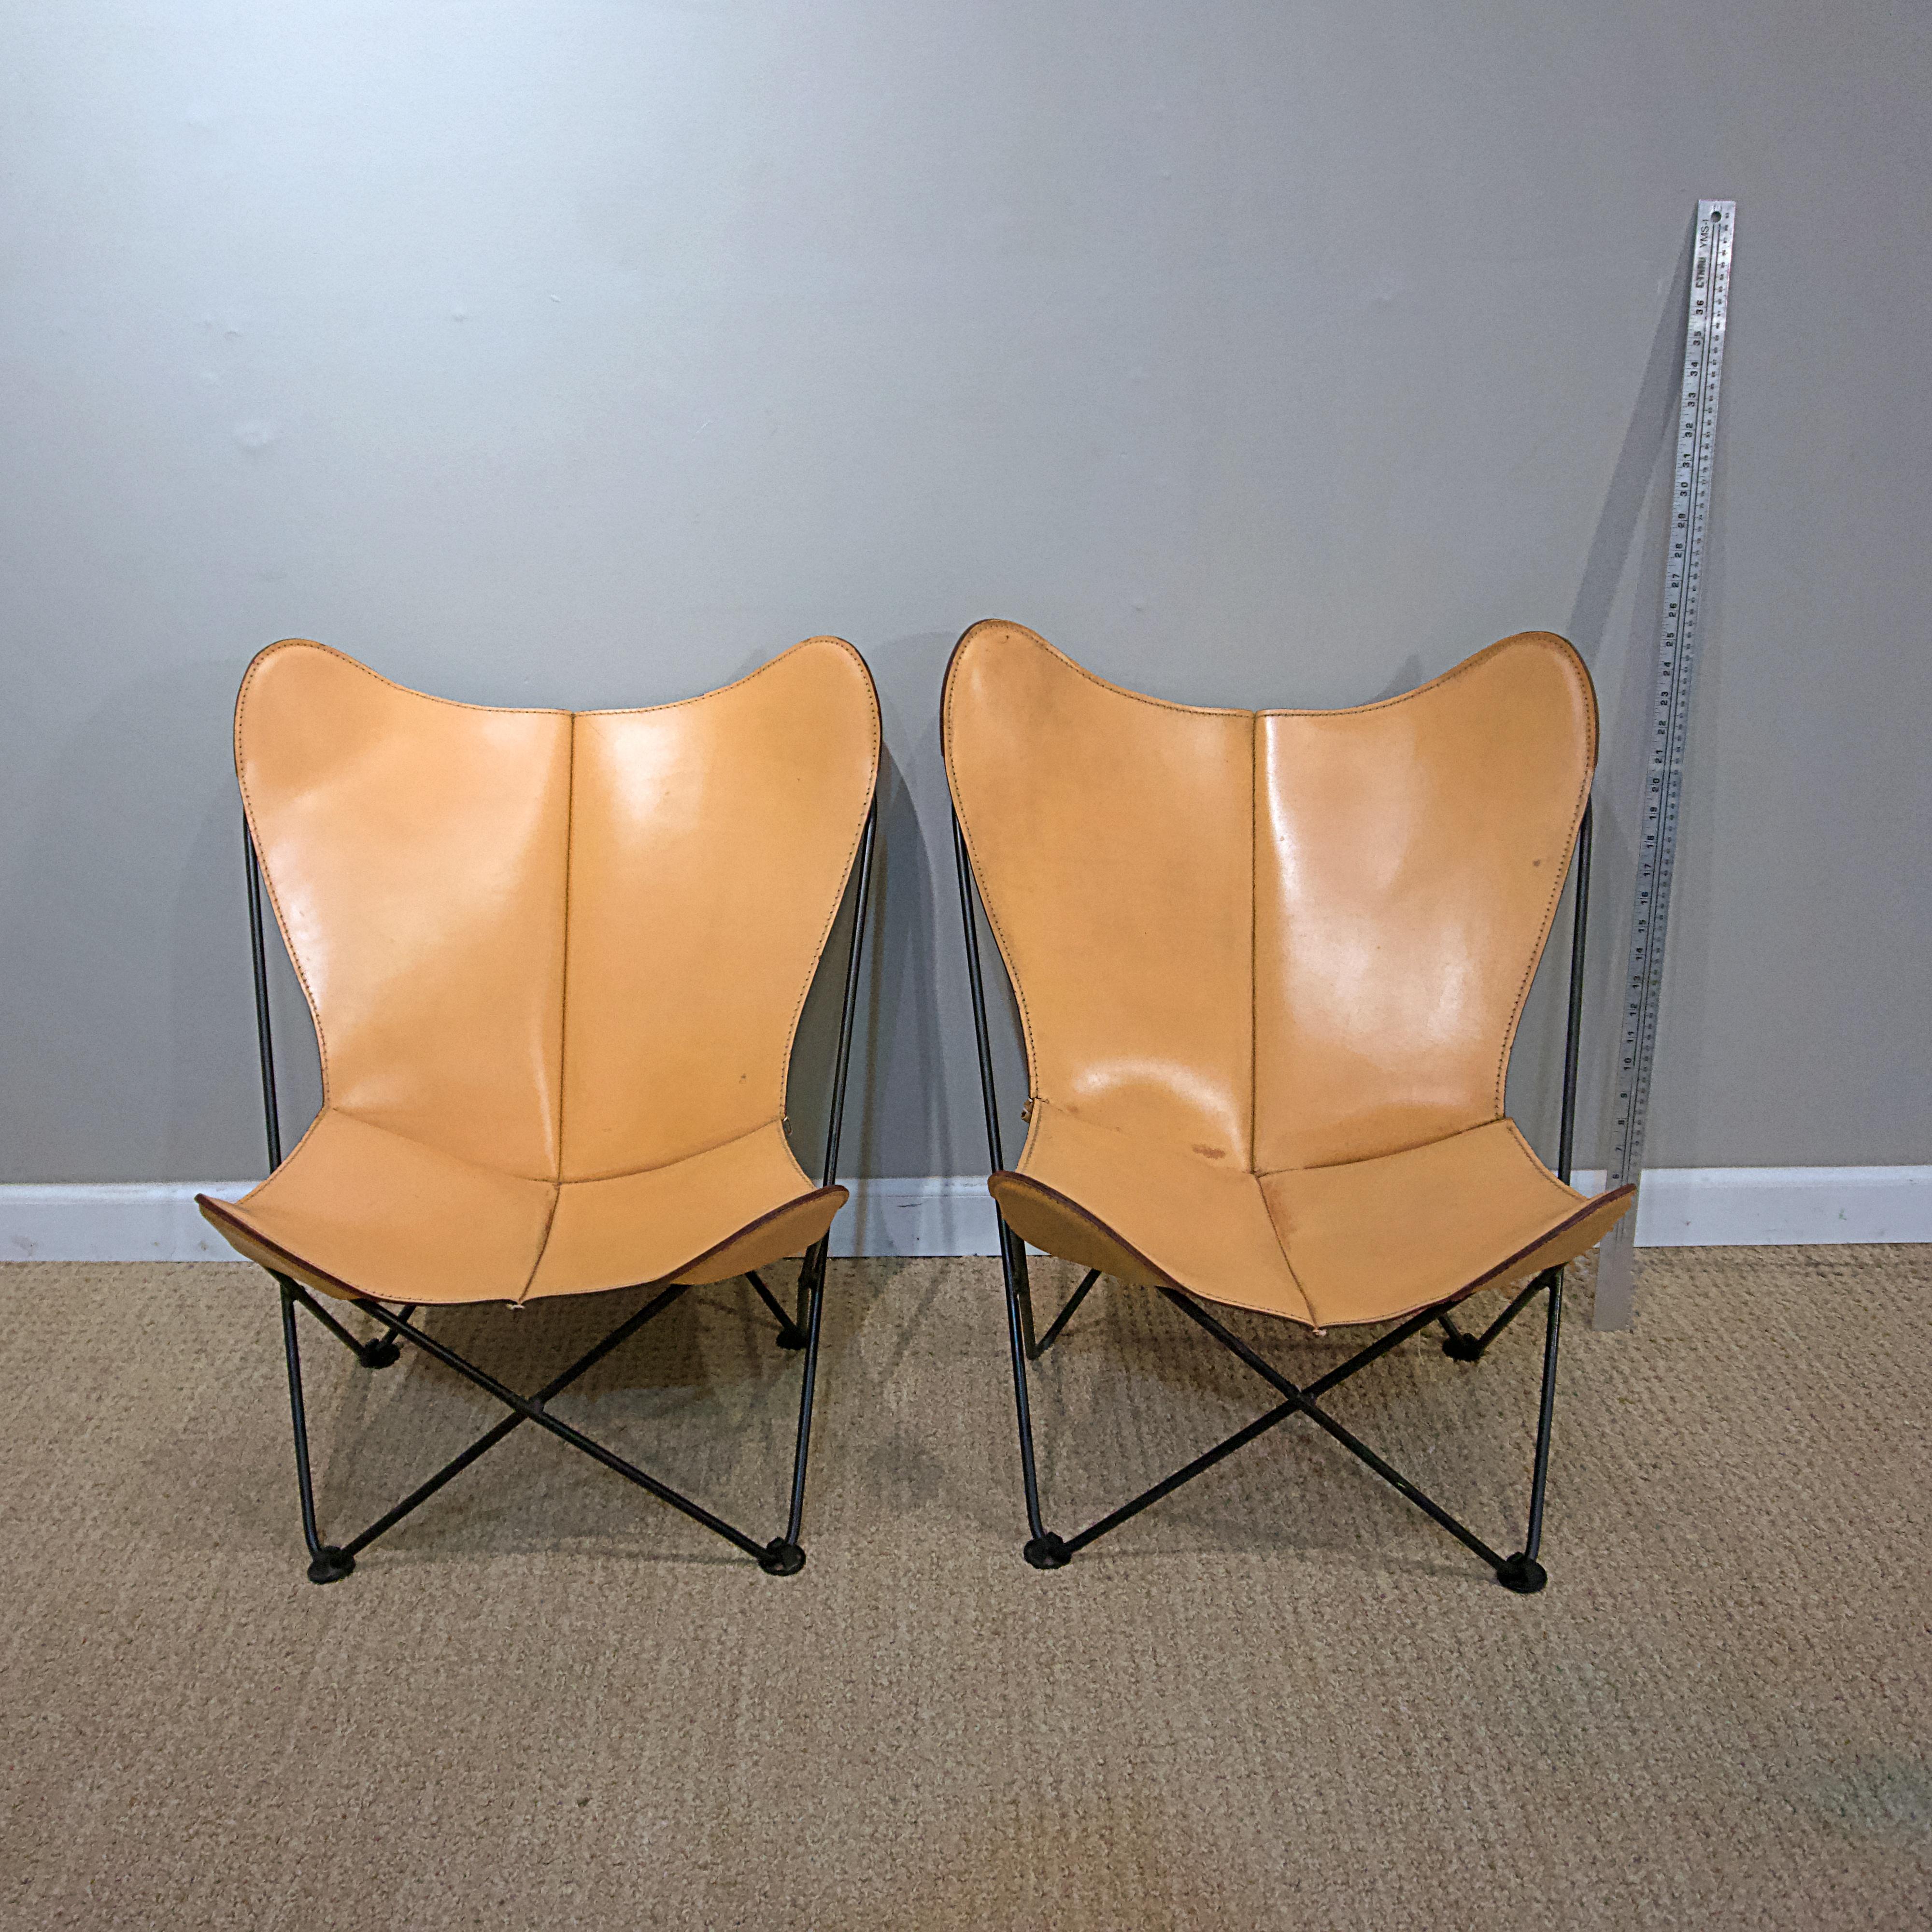 Jorge Ferrari-Hardoy pair of leather butterfly chairs.